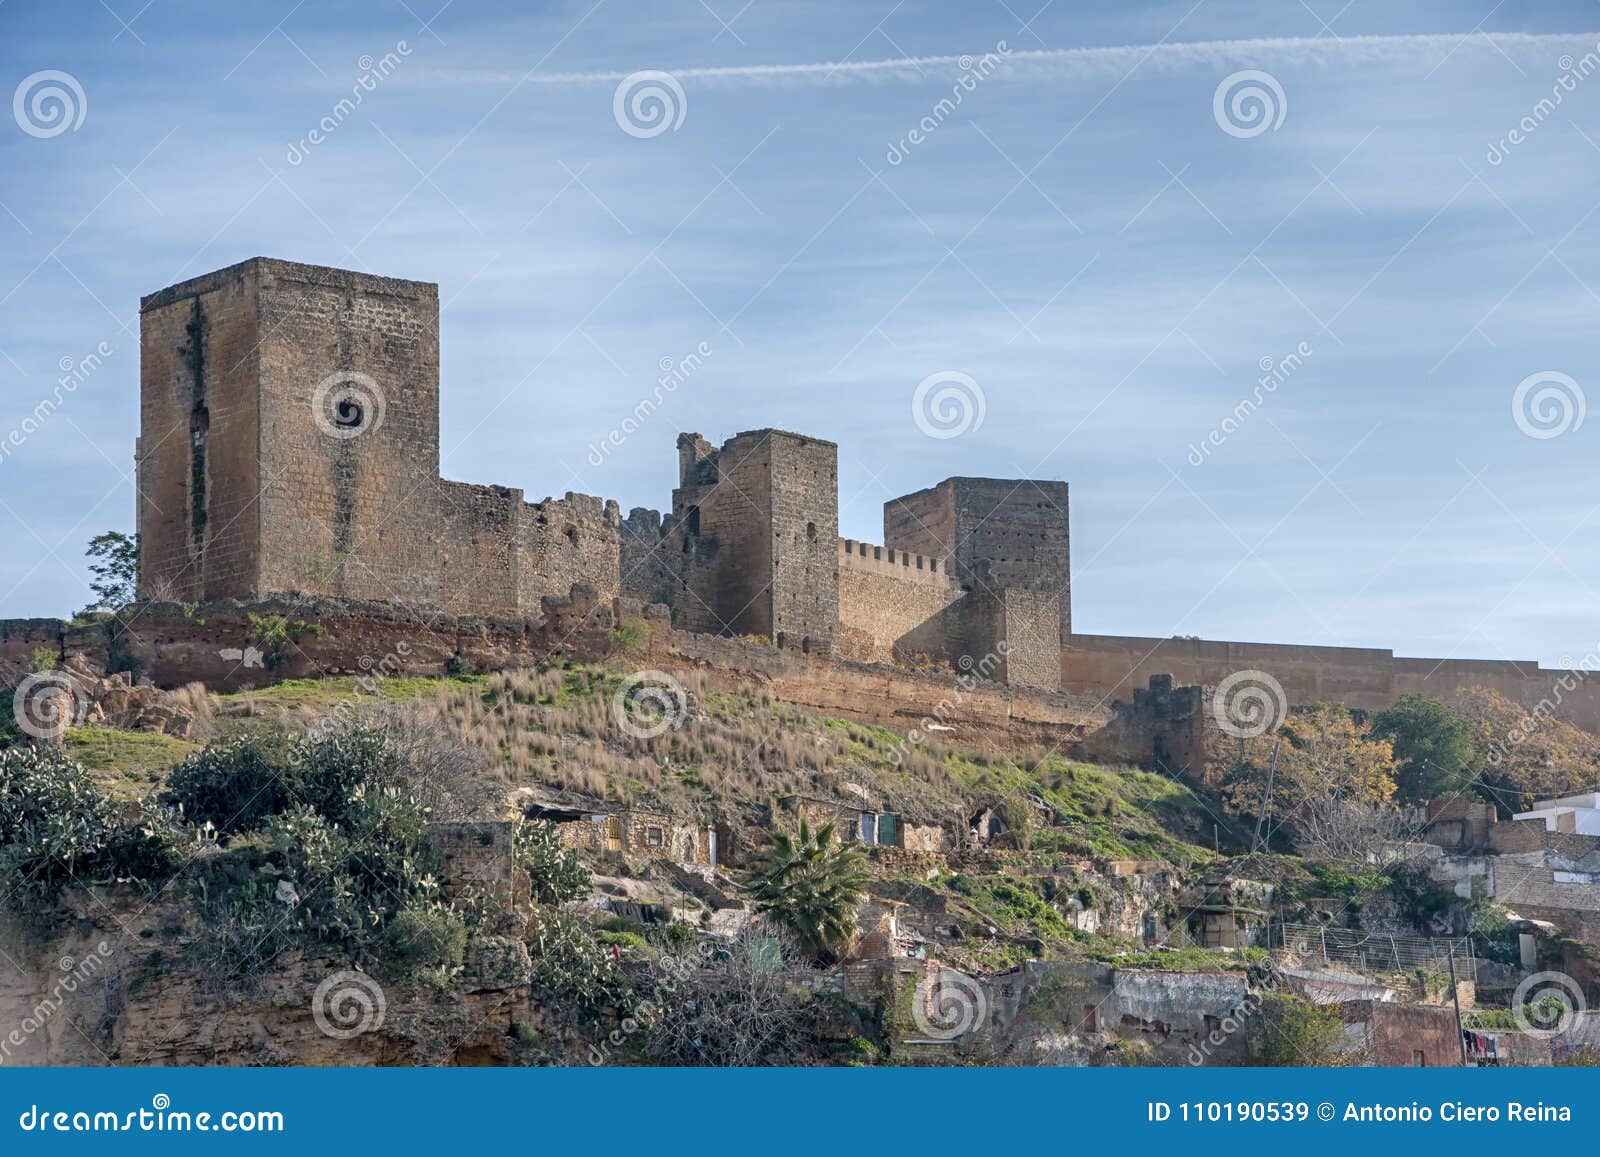 the castle of alcal de guadaira in the province of seville, andalusia